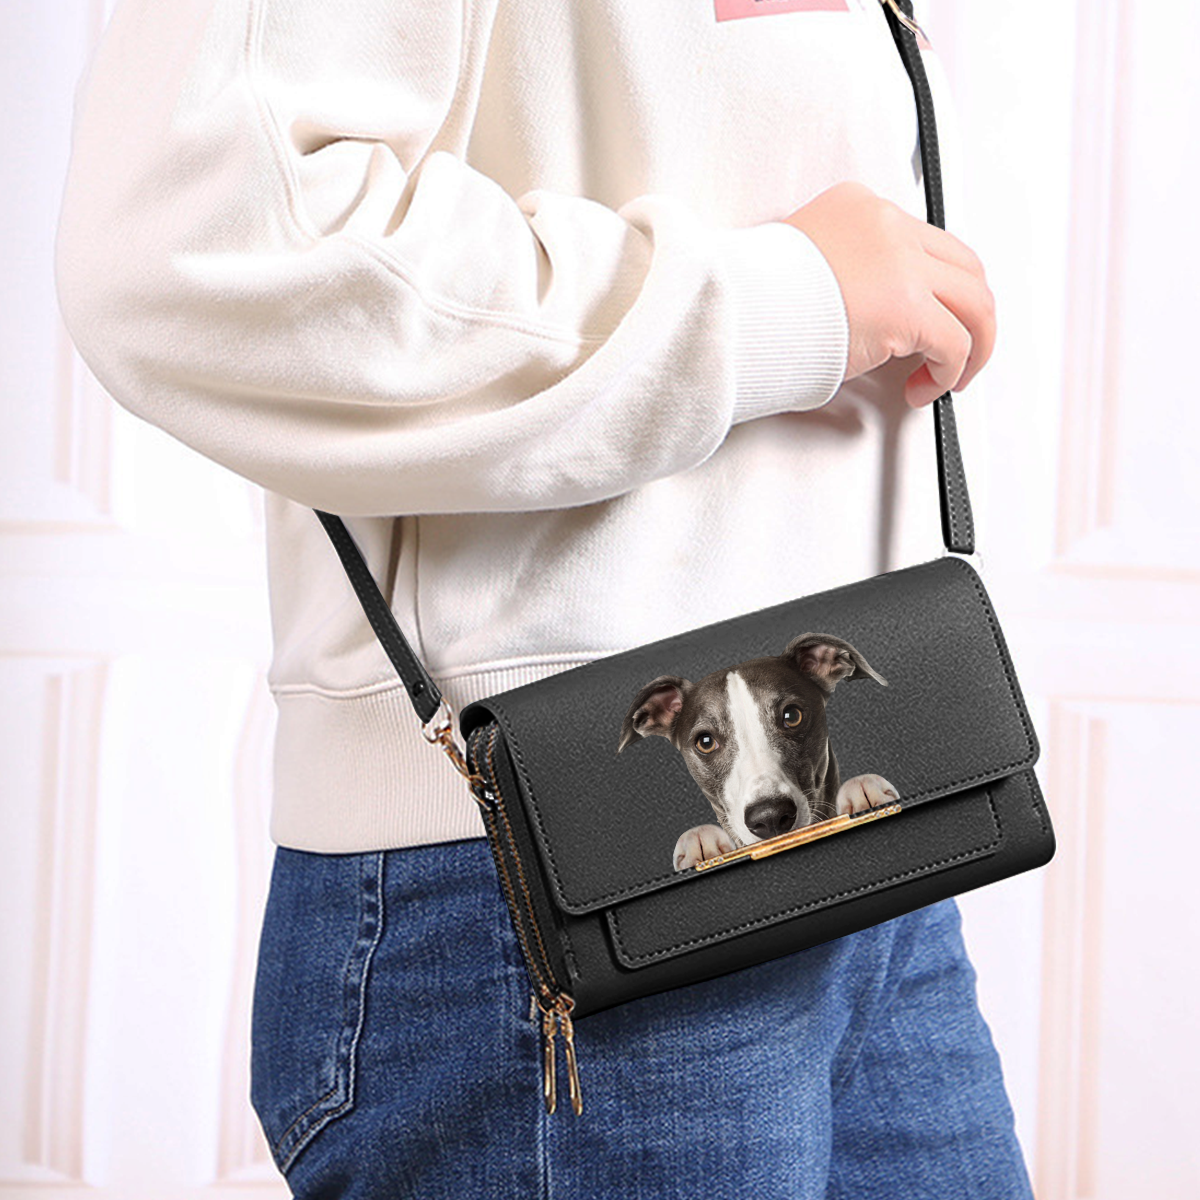 Can You See - Whippet Crossbody Purse Women Clutch V2